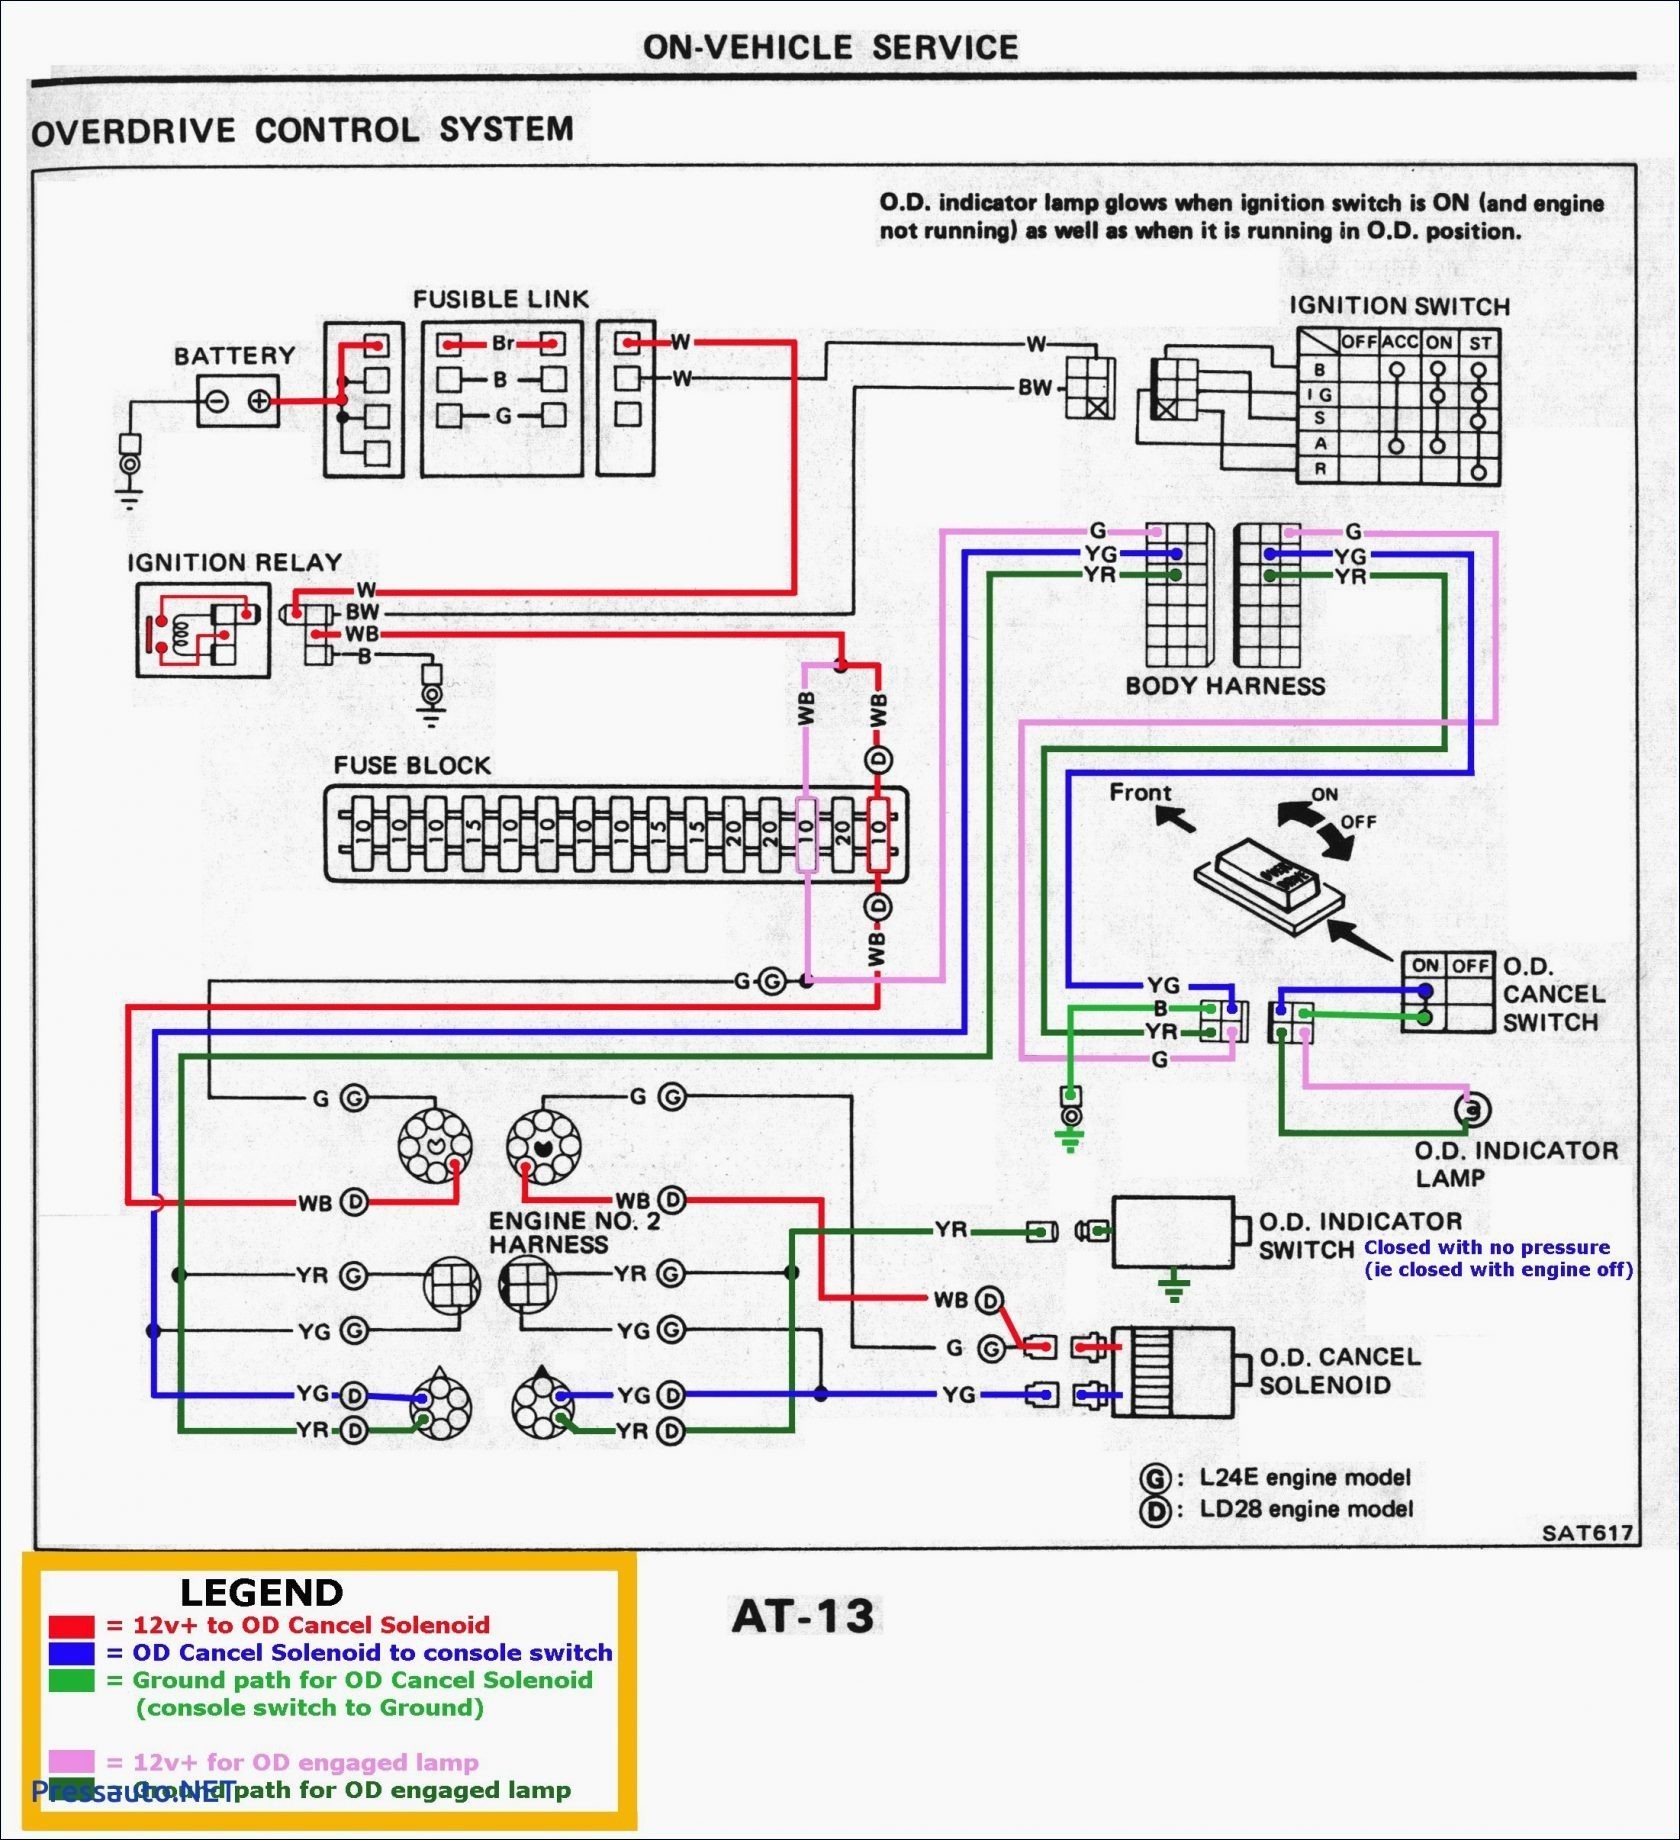 Wiring Diagram for A Double Light Switch Save Wiring Diagram Light Switches New Double Light Switch